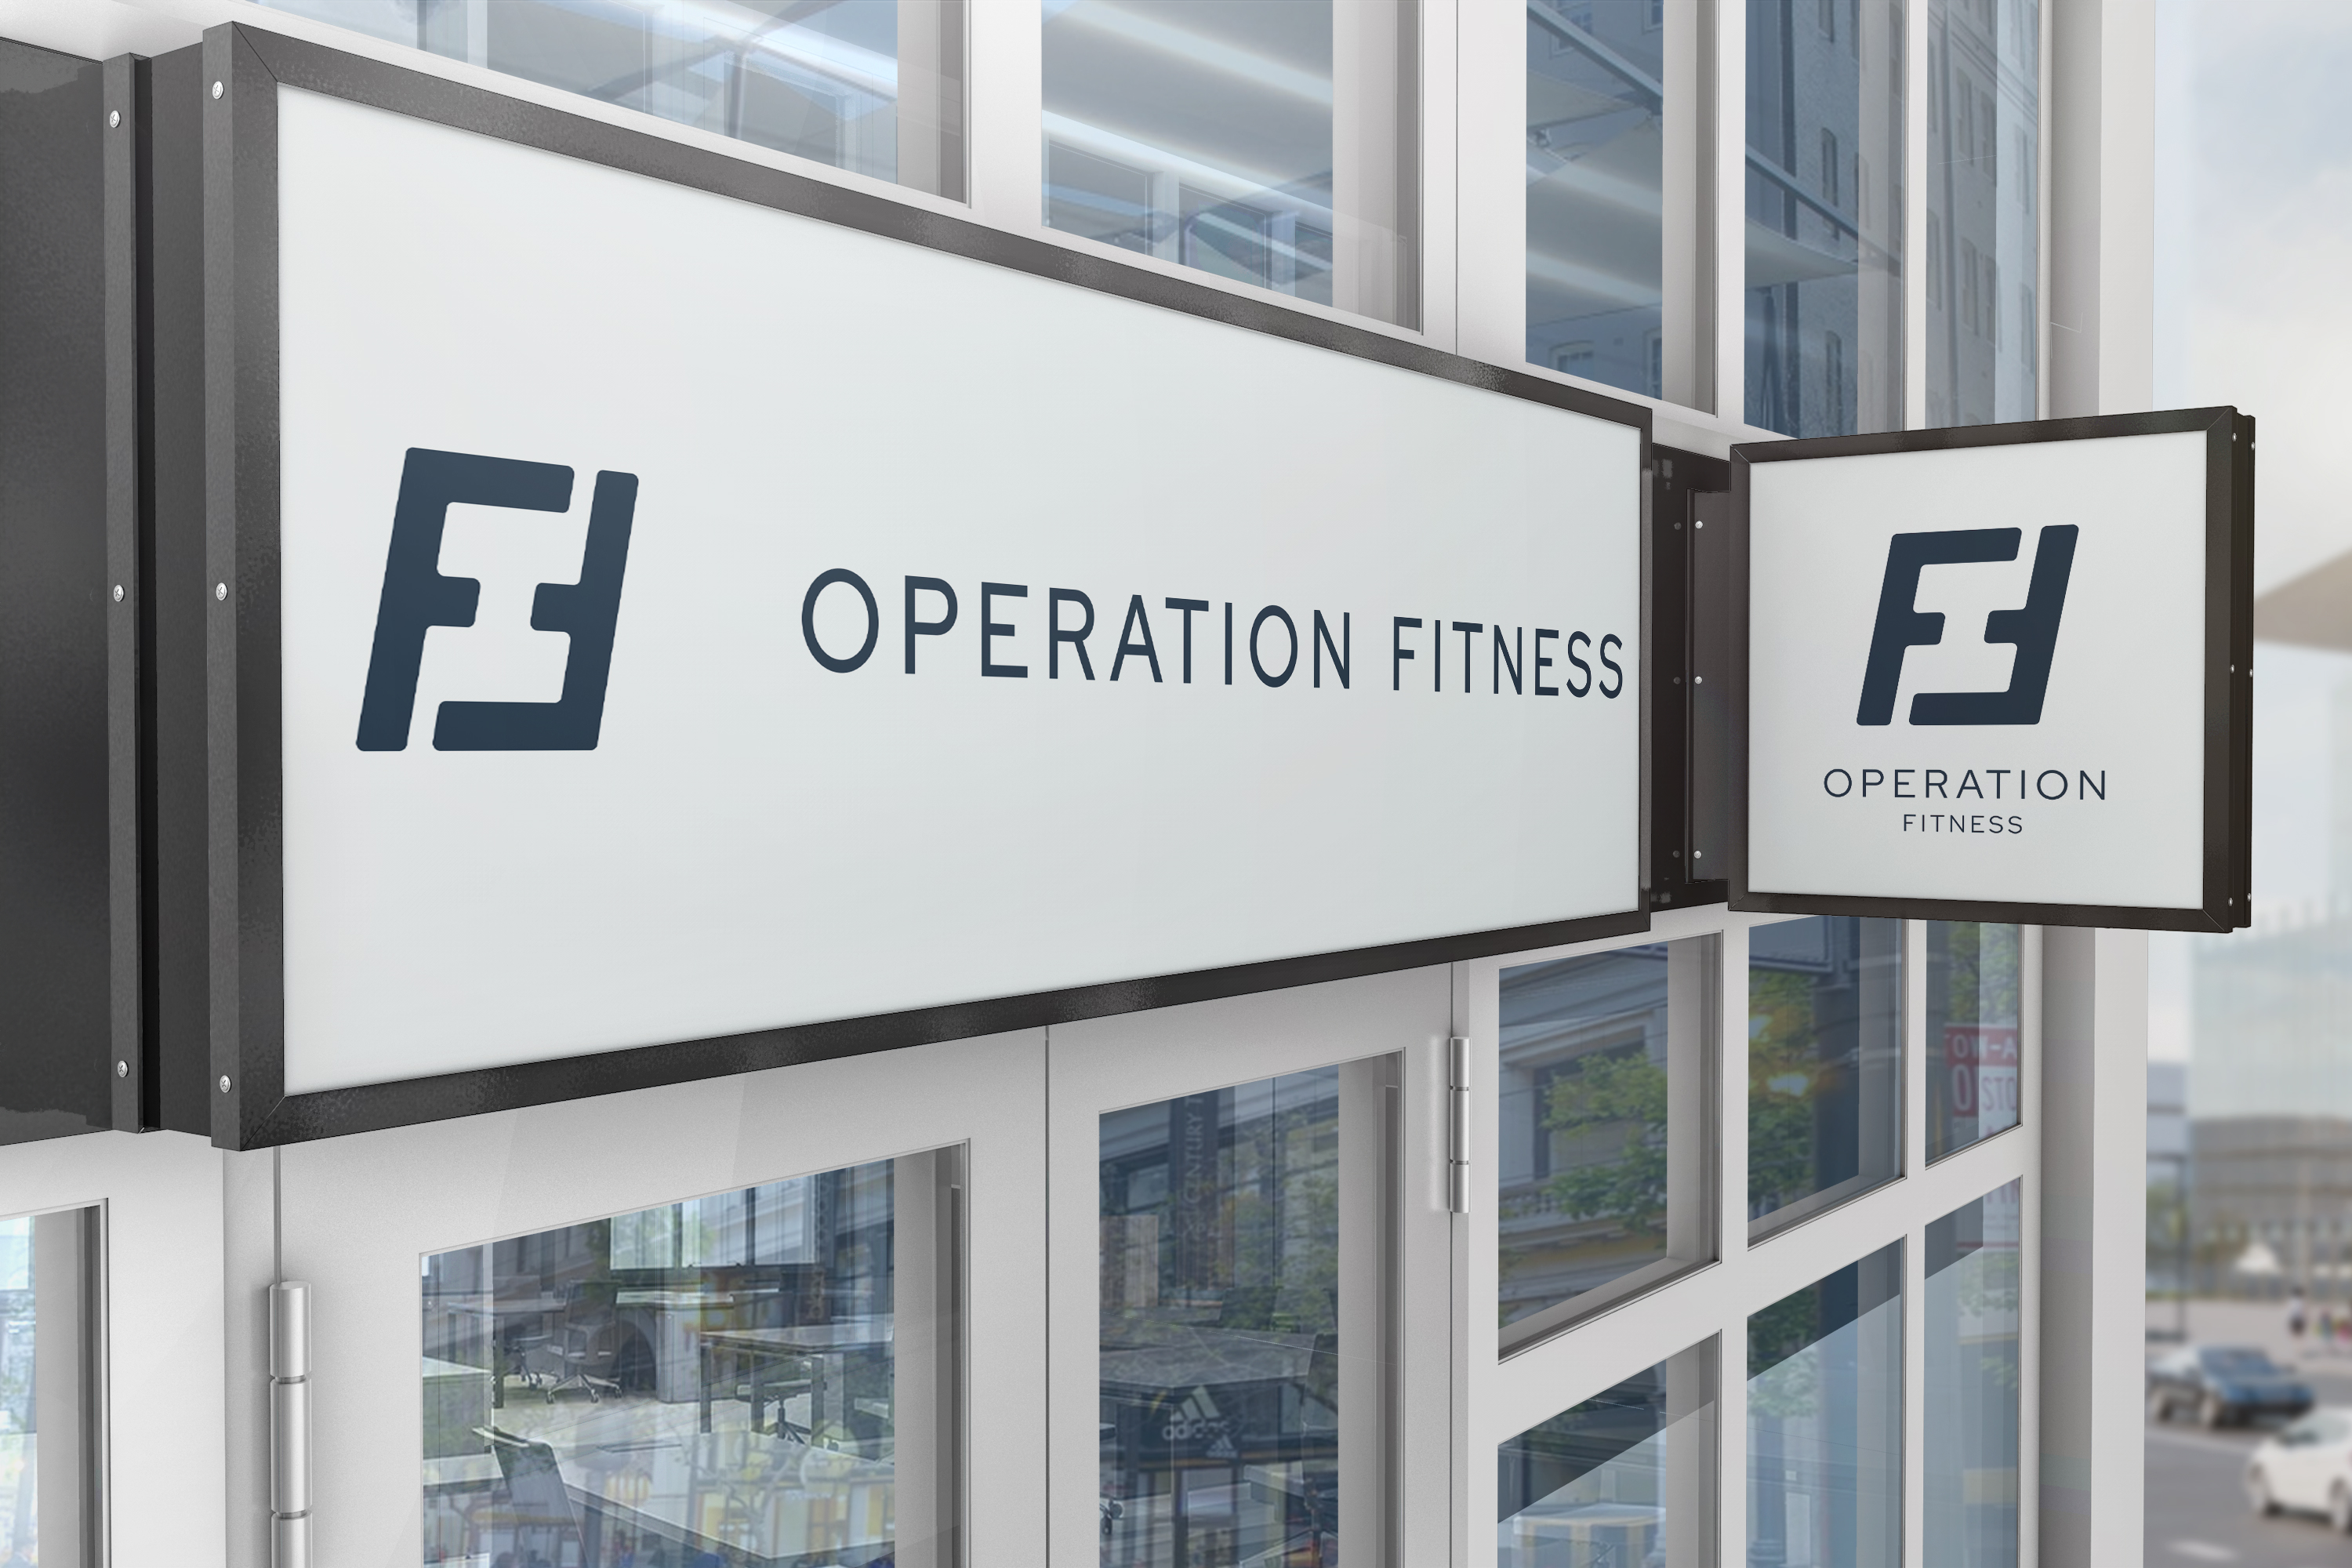 The Operation Fitness sign